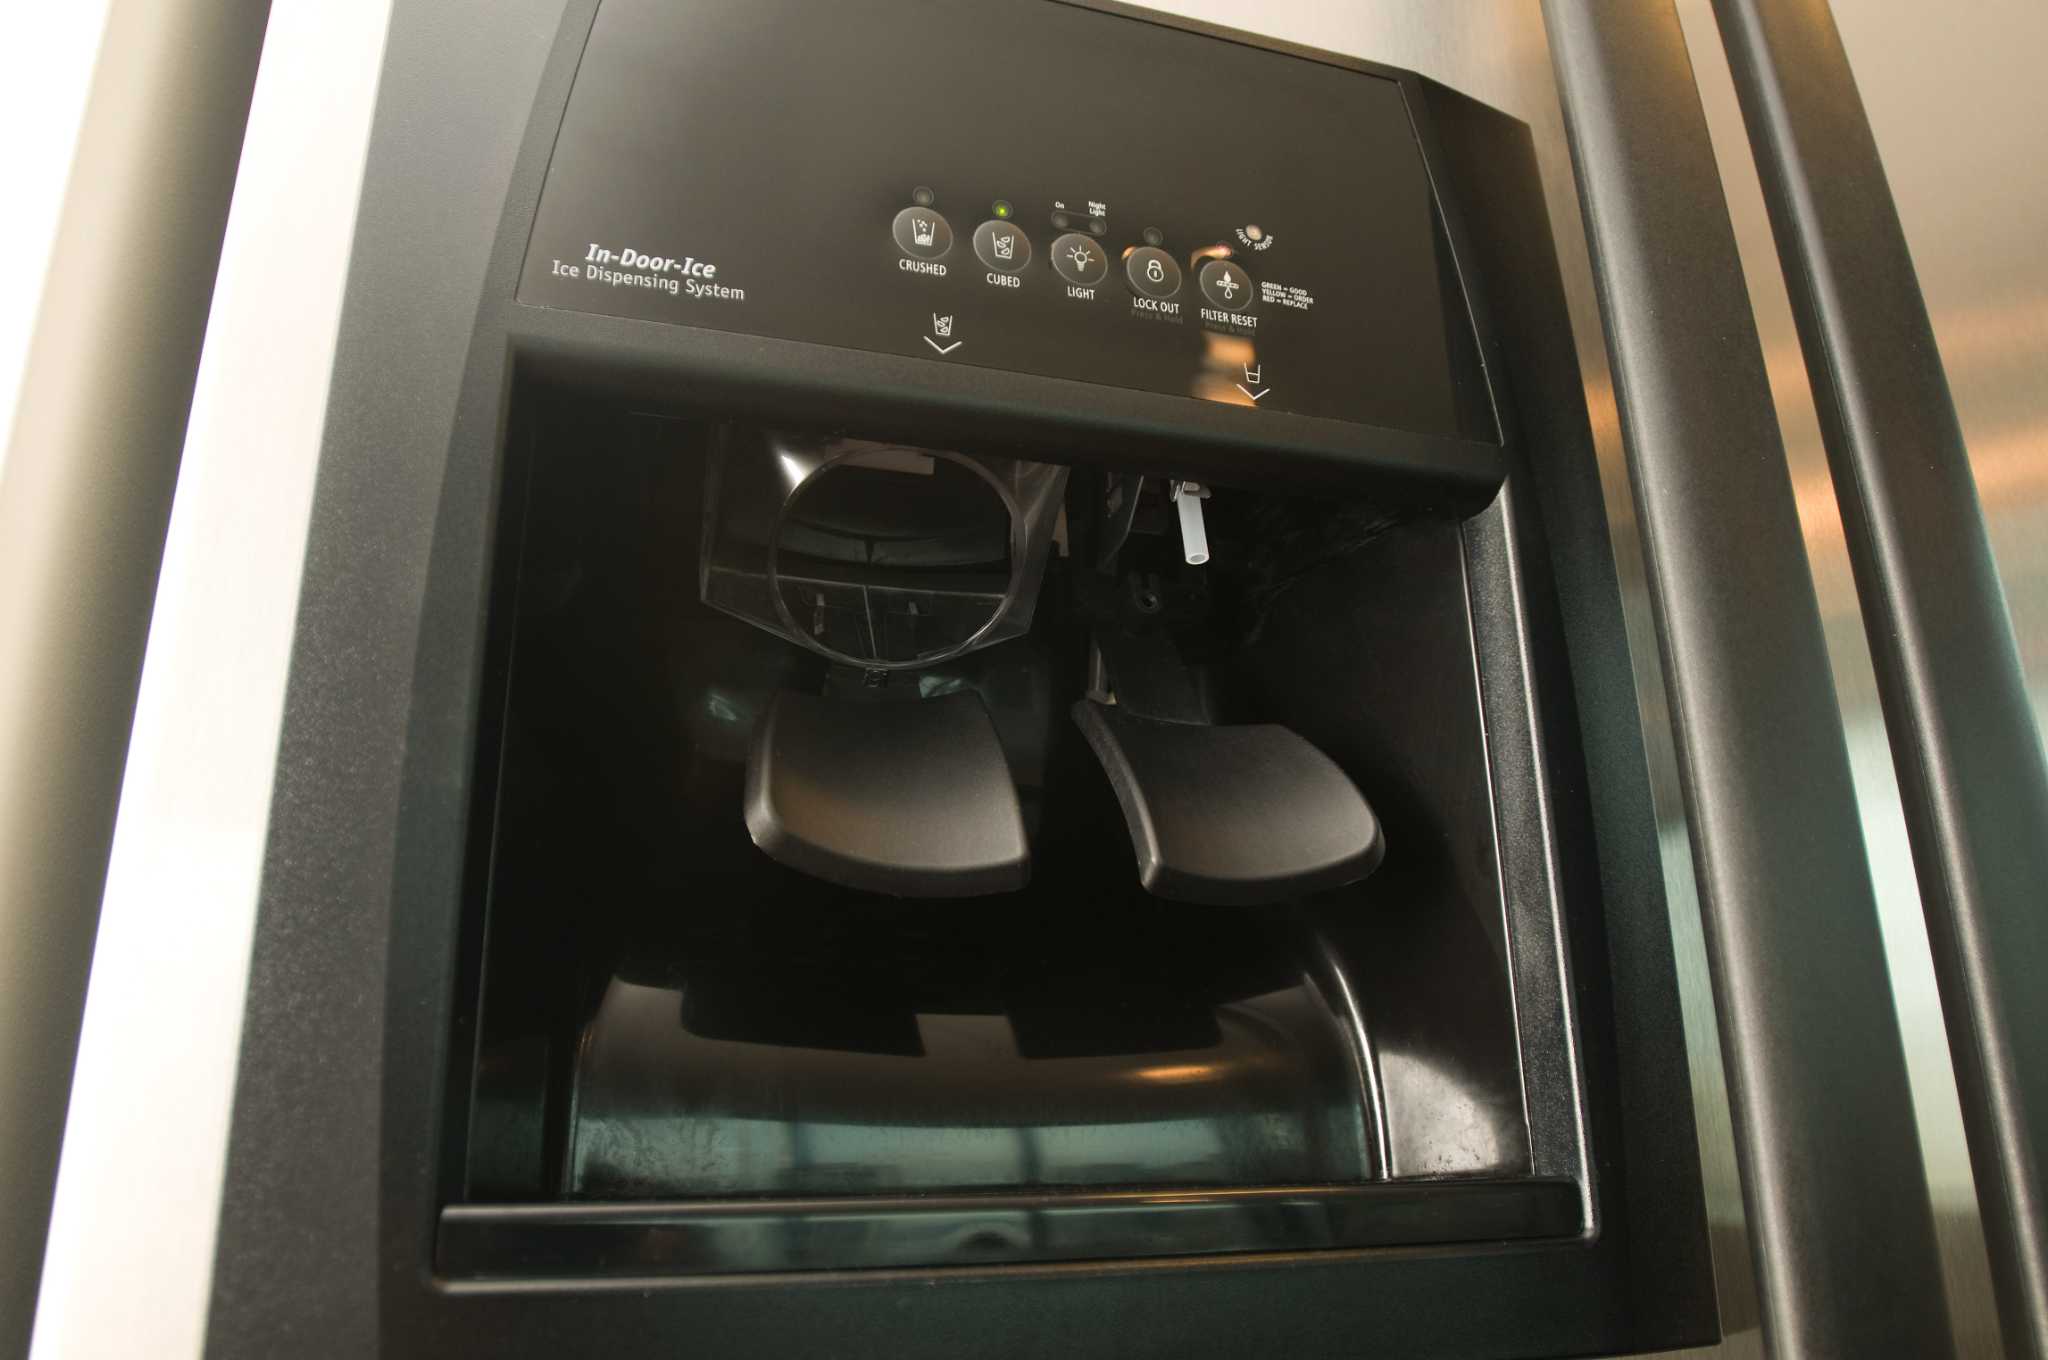 Why Does the Ice Maker Smell? How to Fix It - A to Z Appliance Service